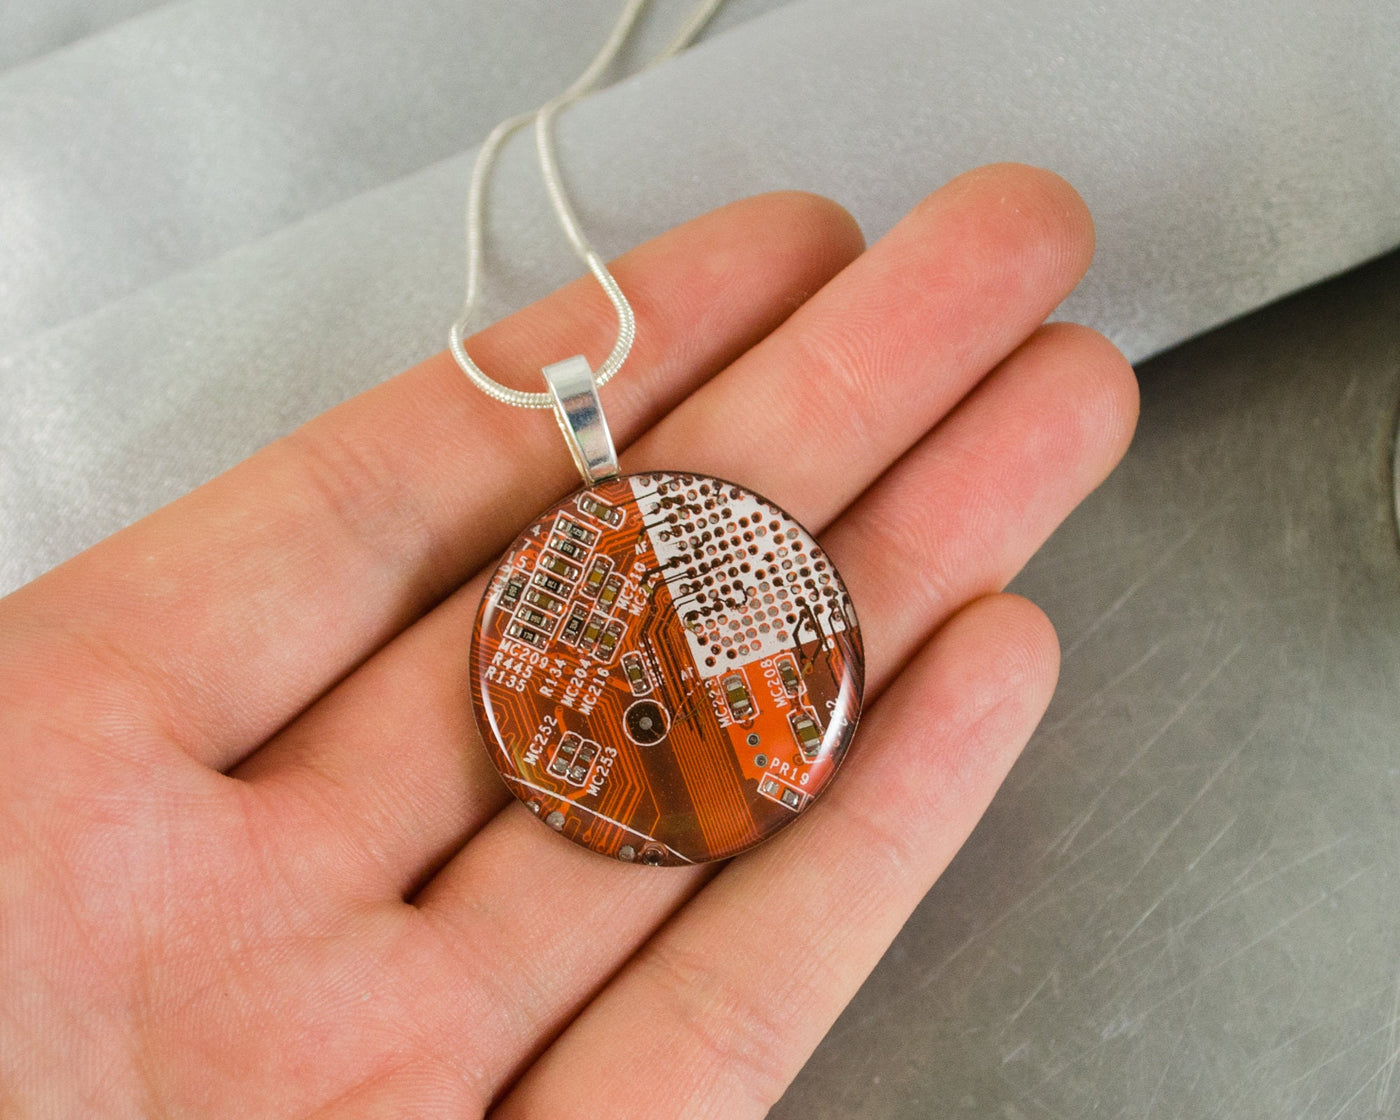 Circuit Board Necklace LARGE Orange, Recycled Motherboard Jewelry, Wearable Technology, Computer Gift, Computer Programmer, Upcycled